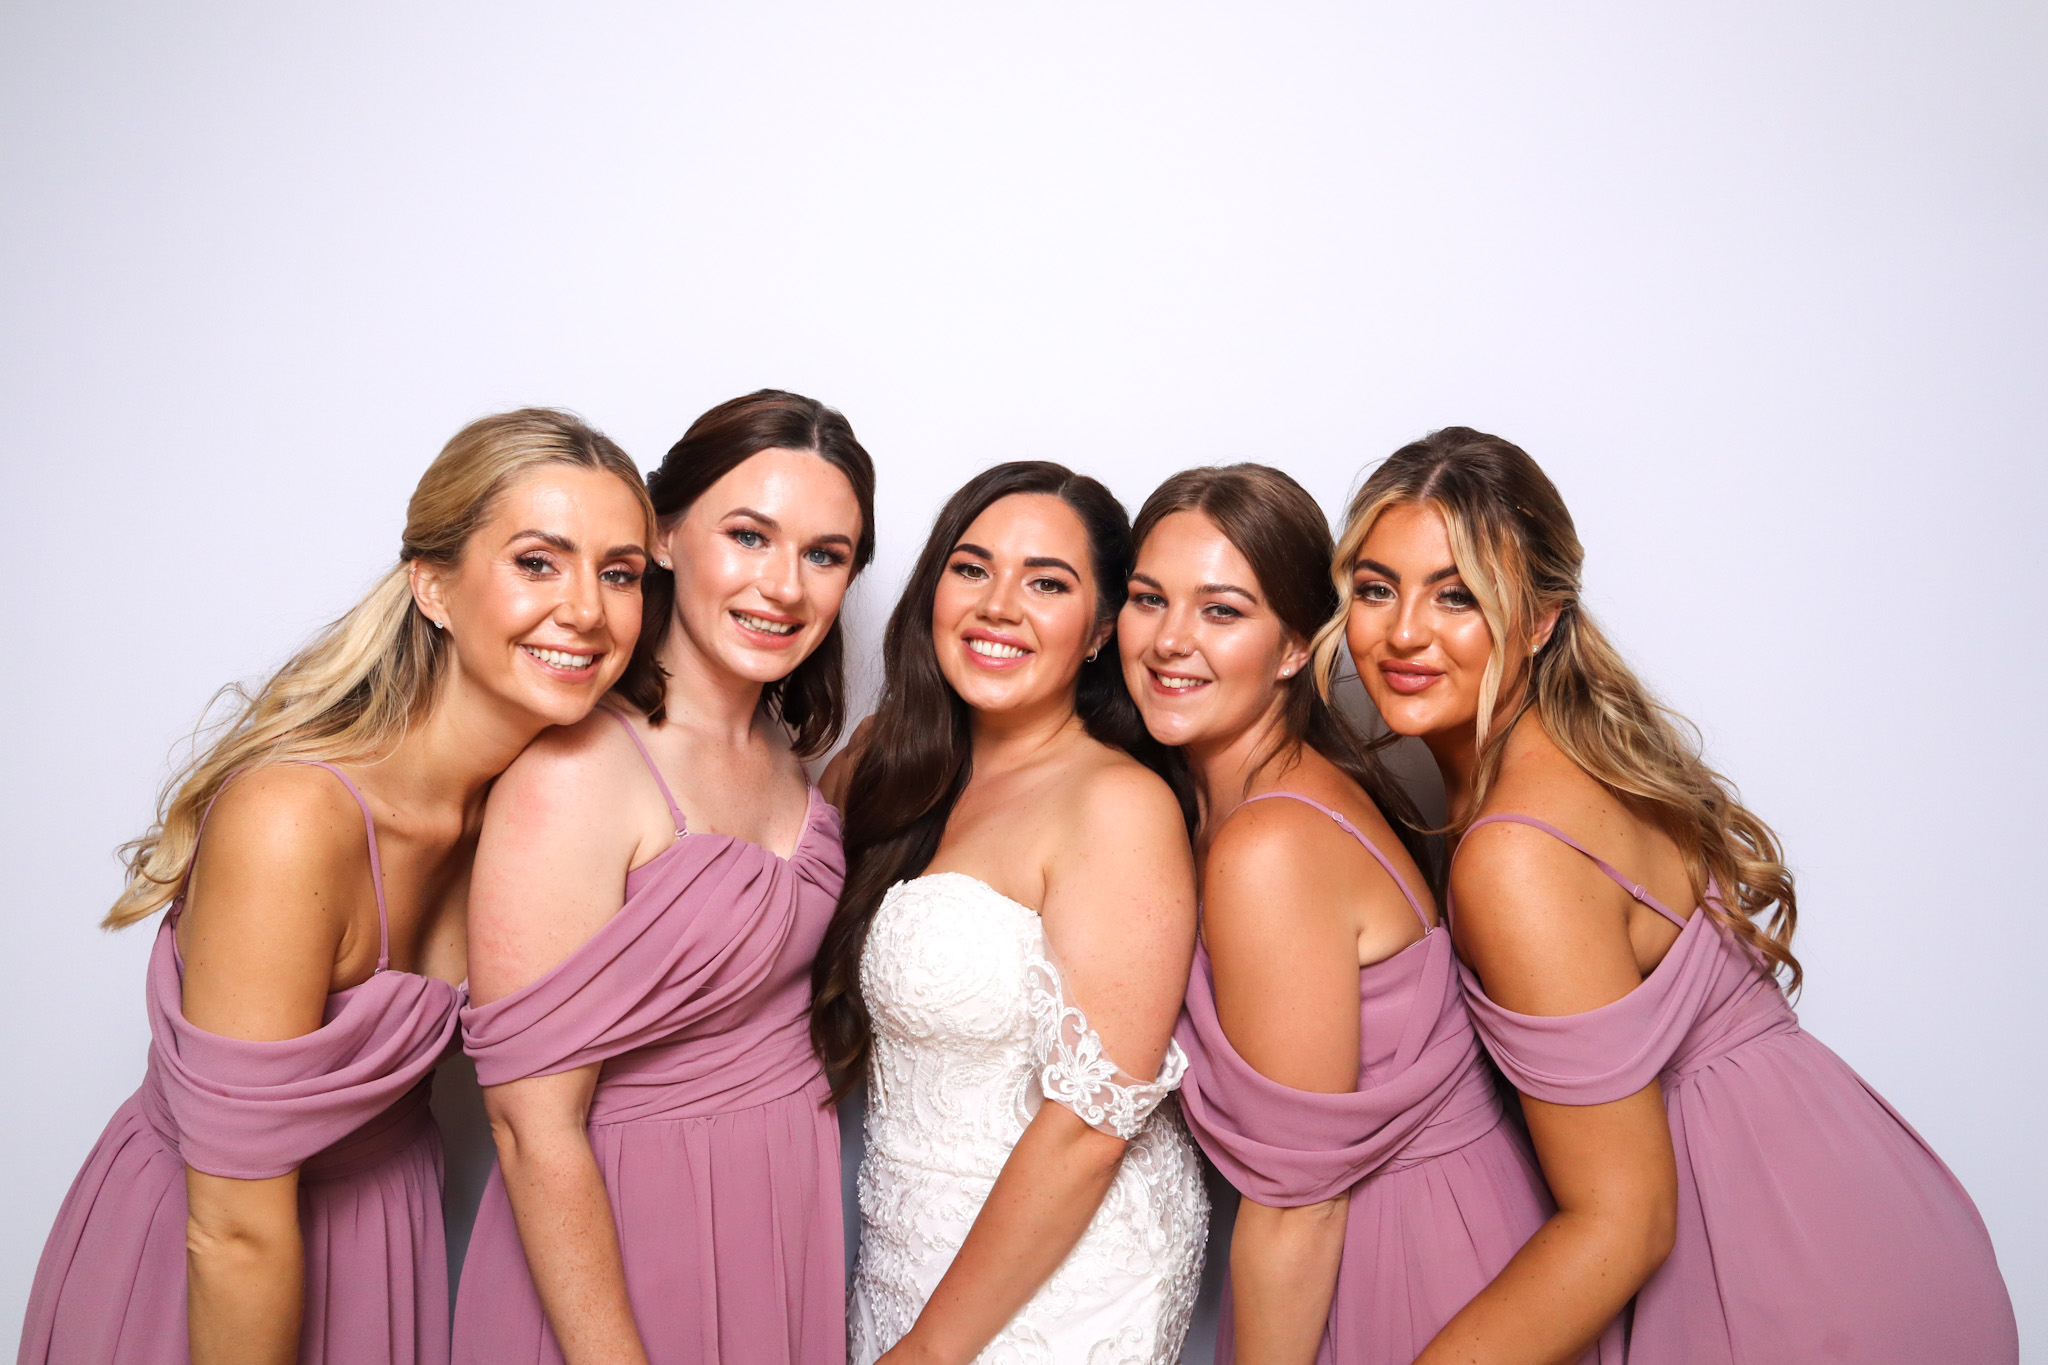 Bride & Bridesmaids posing for the photo booth at The Kingscote Barn in Gloucester